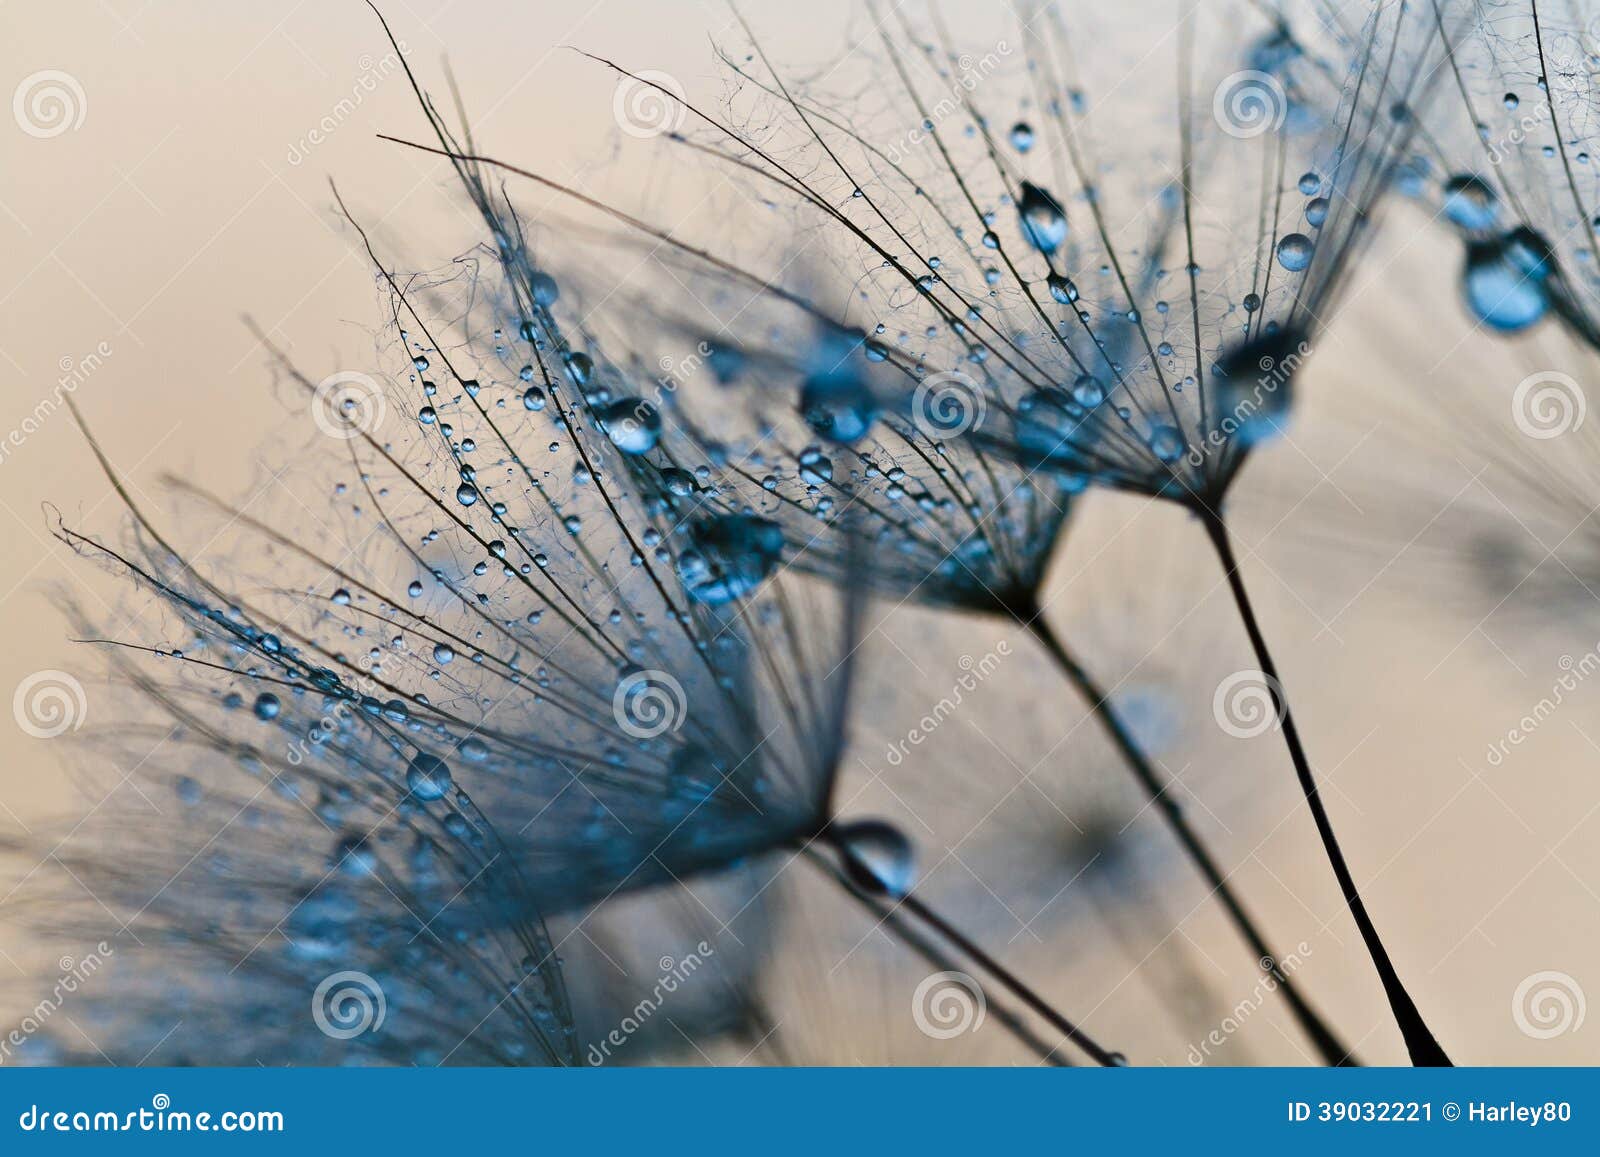 50,008 Dandelion Flower Closeup Photos - Free & Stock from Dreamstime